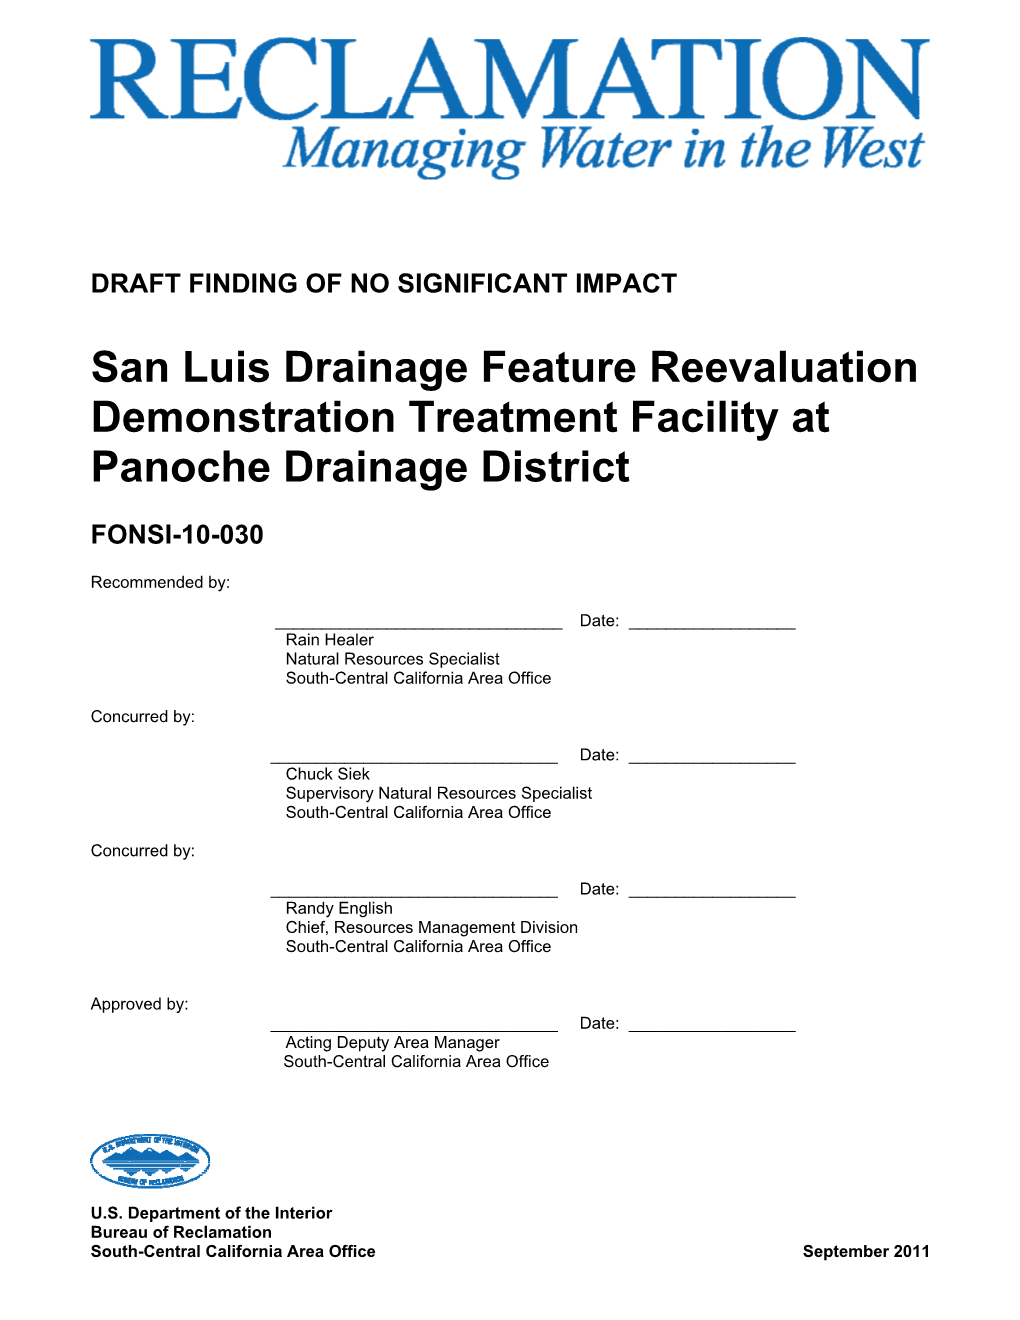 San Luis Drainage Feature Reevaluation Demonstration Treatment Facility at Panoche Drainage District